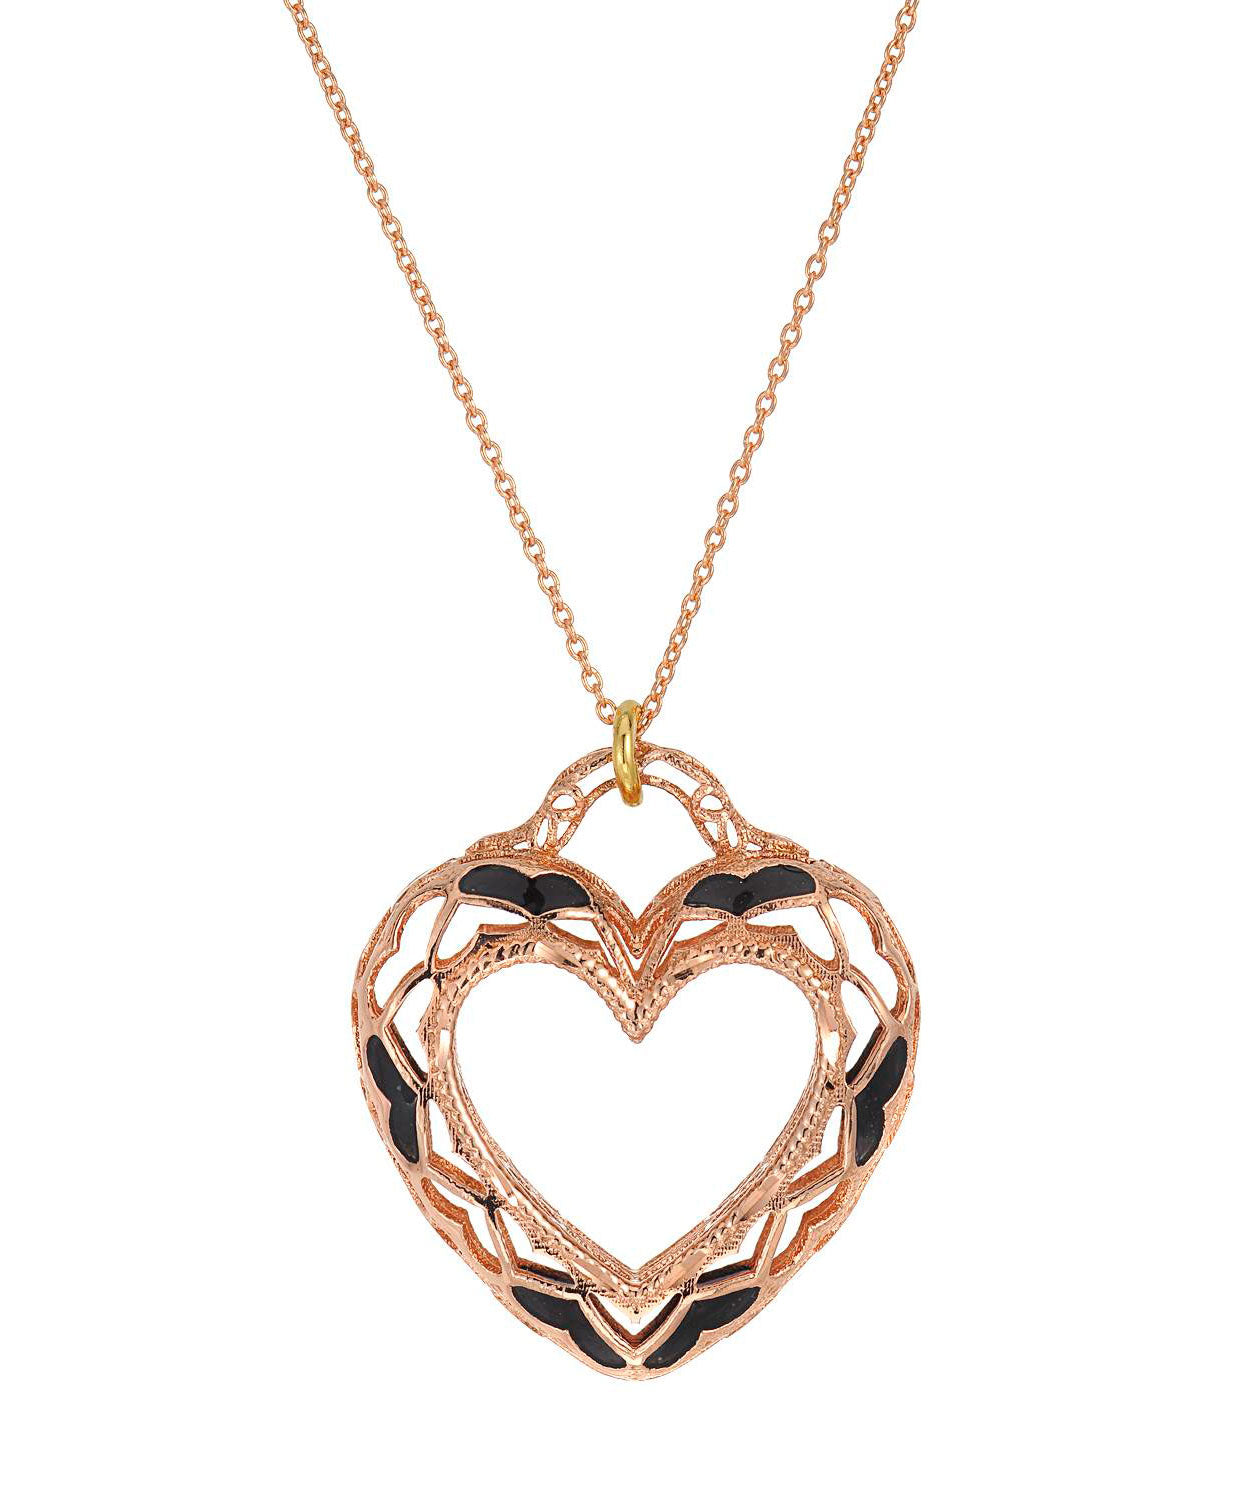 Patterns of Love Collection 14k Gold & Enamel Heart Adjustable Necklace - Made in Italy View 1